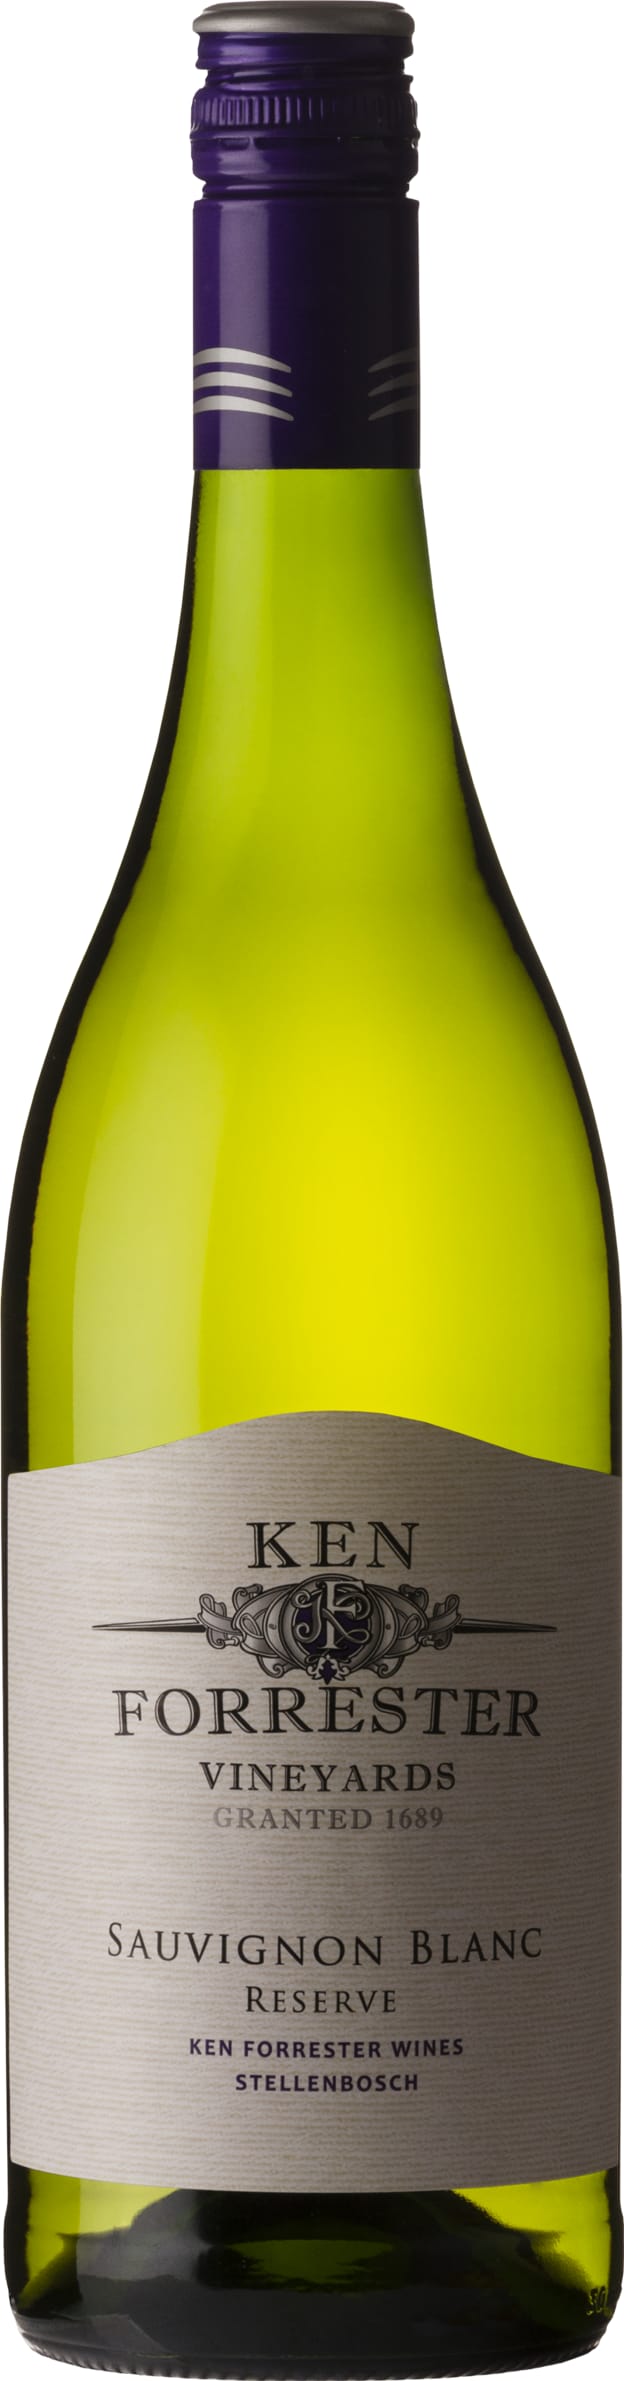 Ken Forrester Wines 2022 Sauvignon Blanc Reserve, Ken Forrester Wines 2022 75cl - Buy Ken Forrester Wines Wines from GREAT WINES DIRECT wine shop